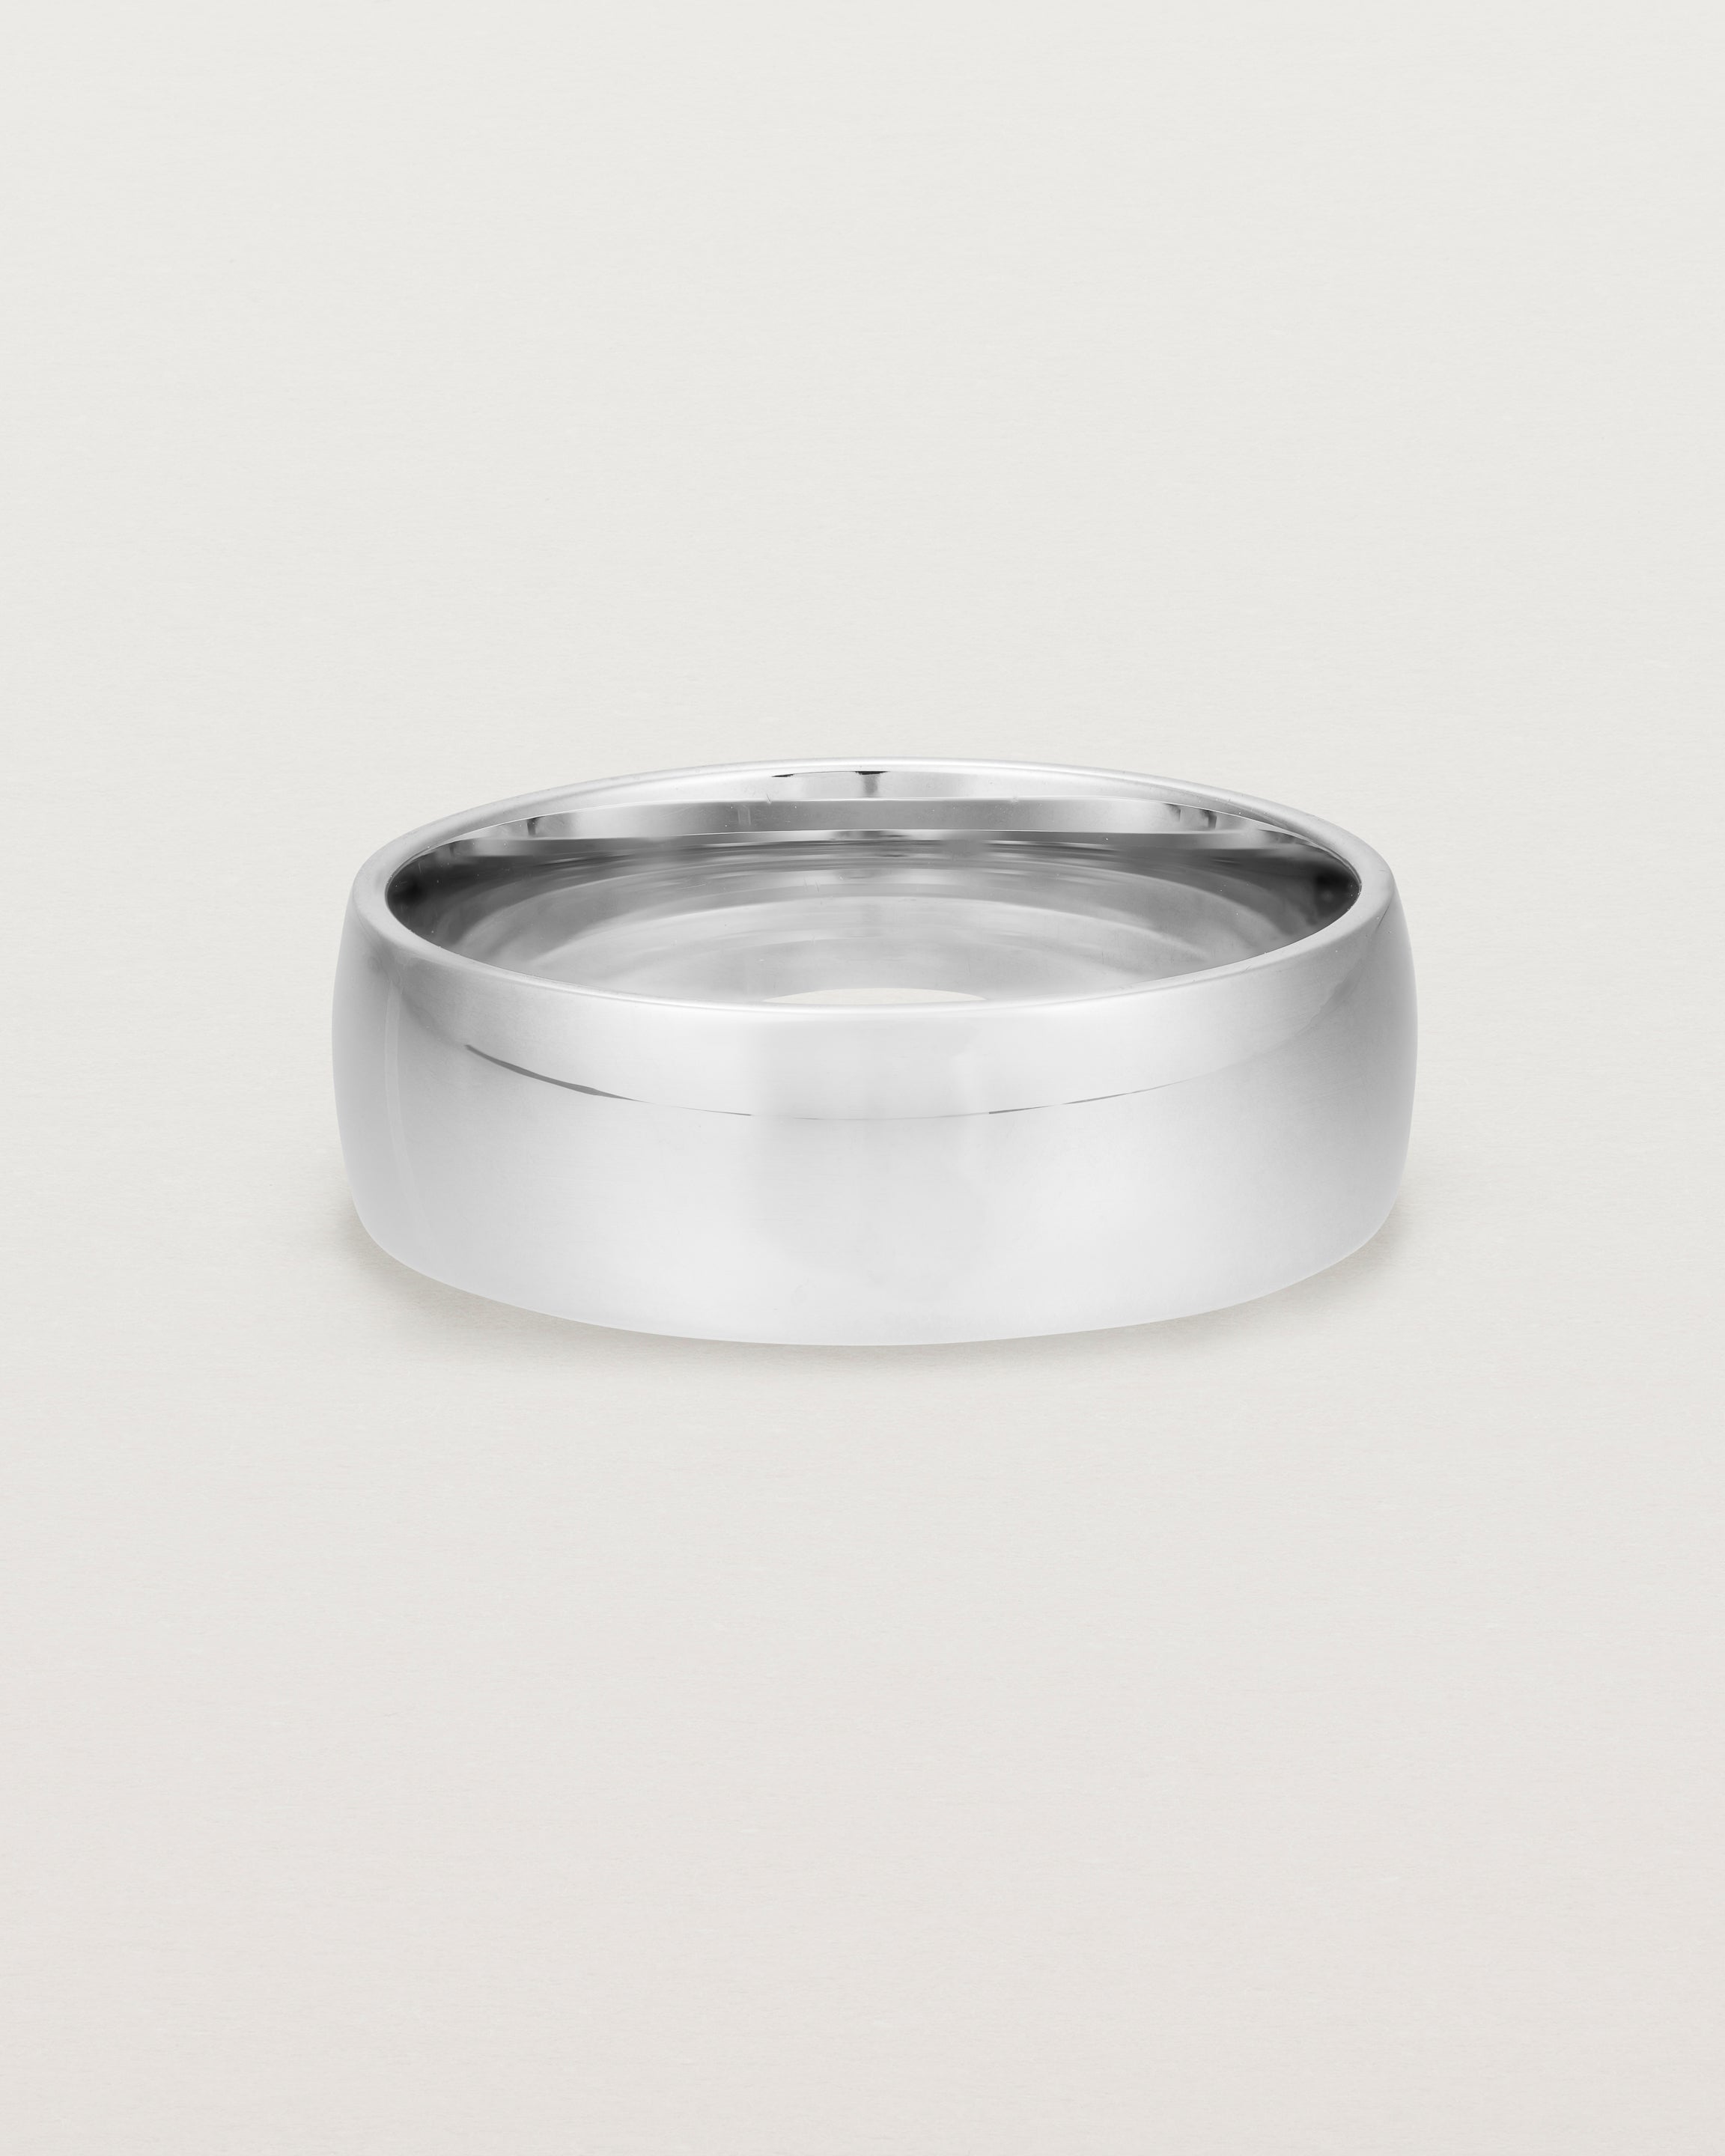 The front view of a heavy 7mm wedding band in white gold